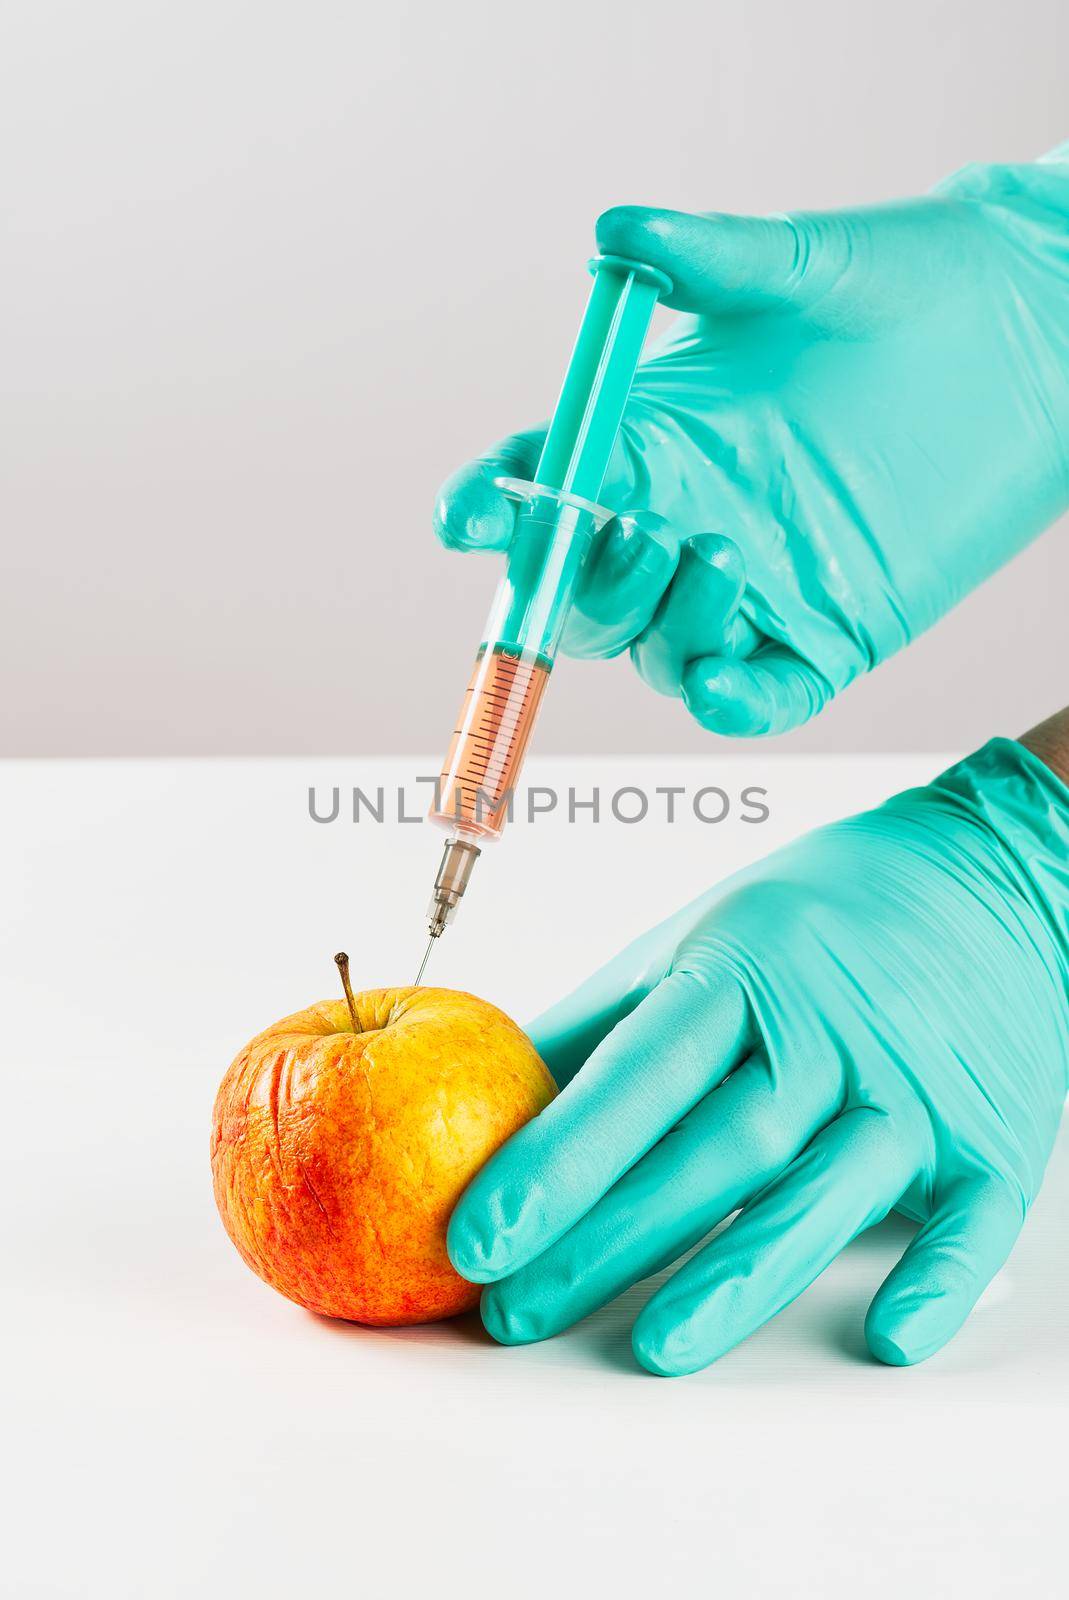 A hand in a medical glove inserts a syringe into apple. Harmful food additives. GMOs Concept by PhotoTime